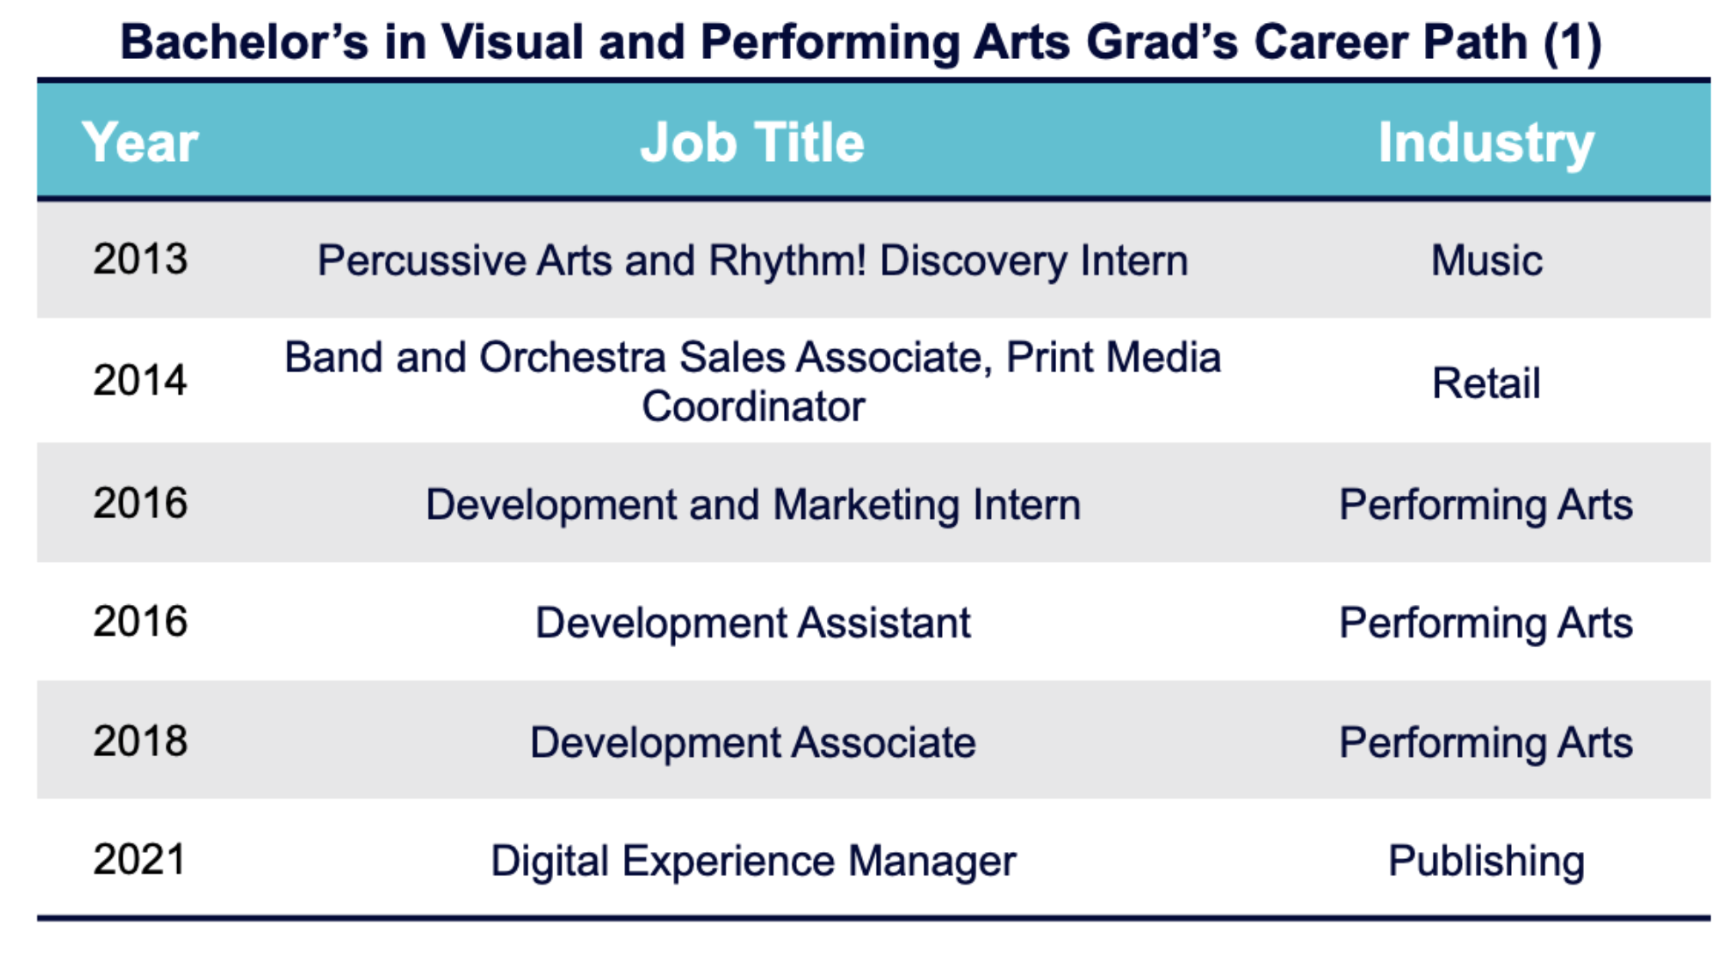 Bachelor's in Visual and performing Arts Grad's Career Path (1)